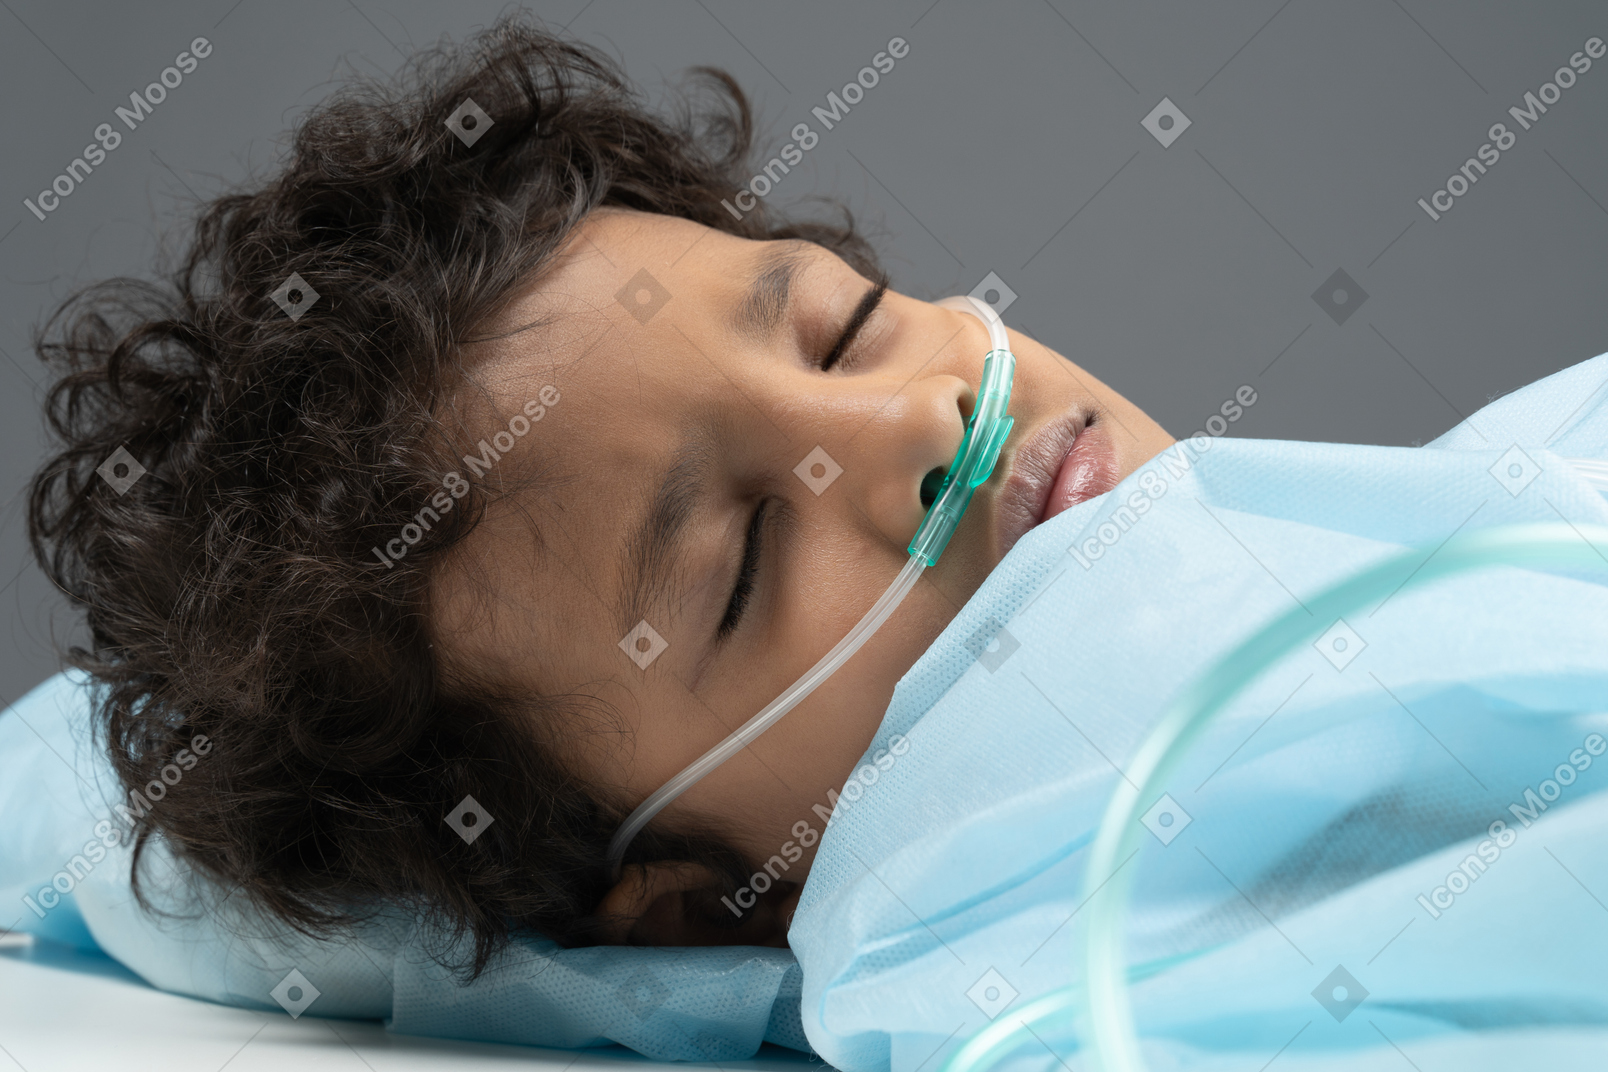 Child with nasal cannula closed his eyes